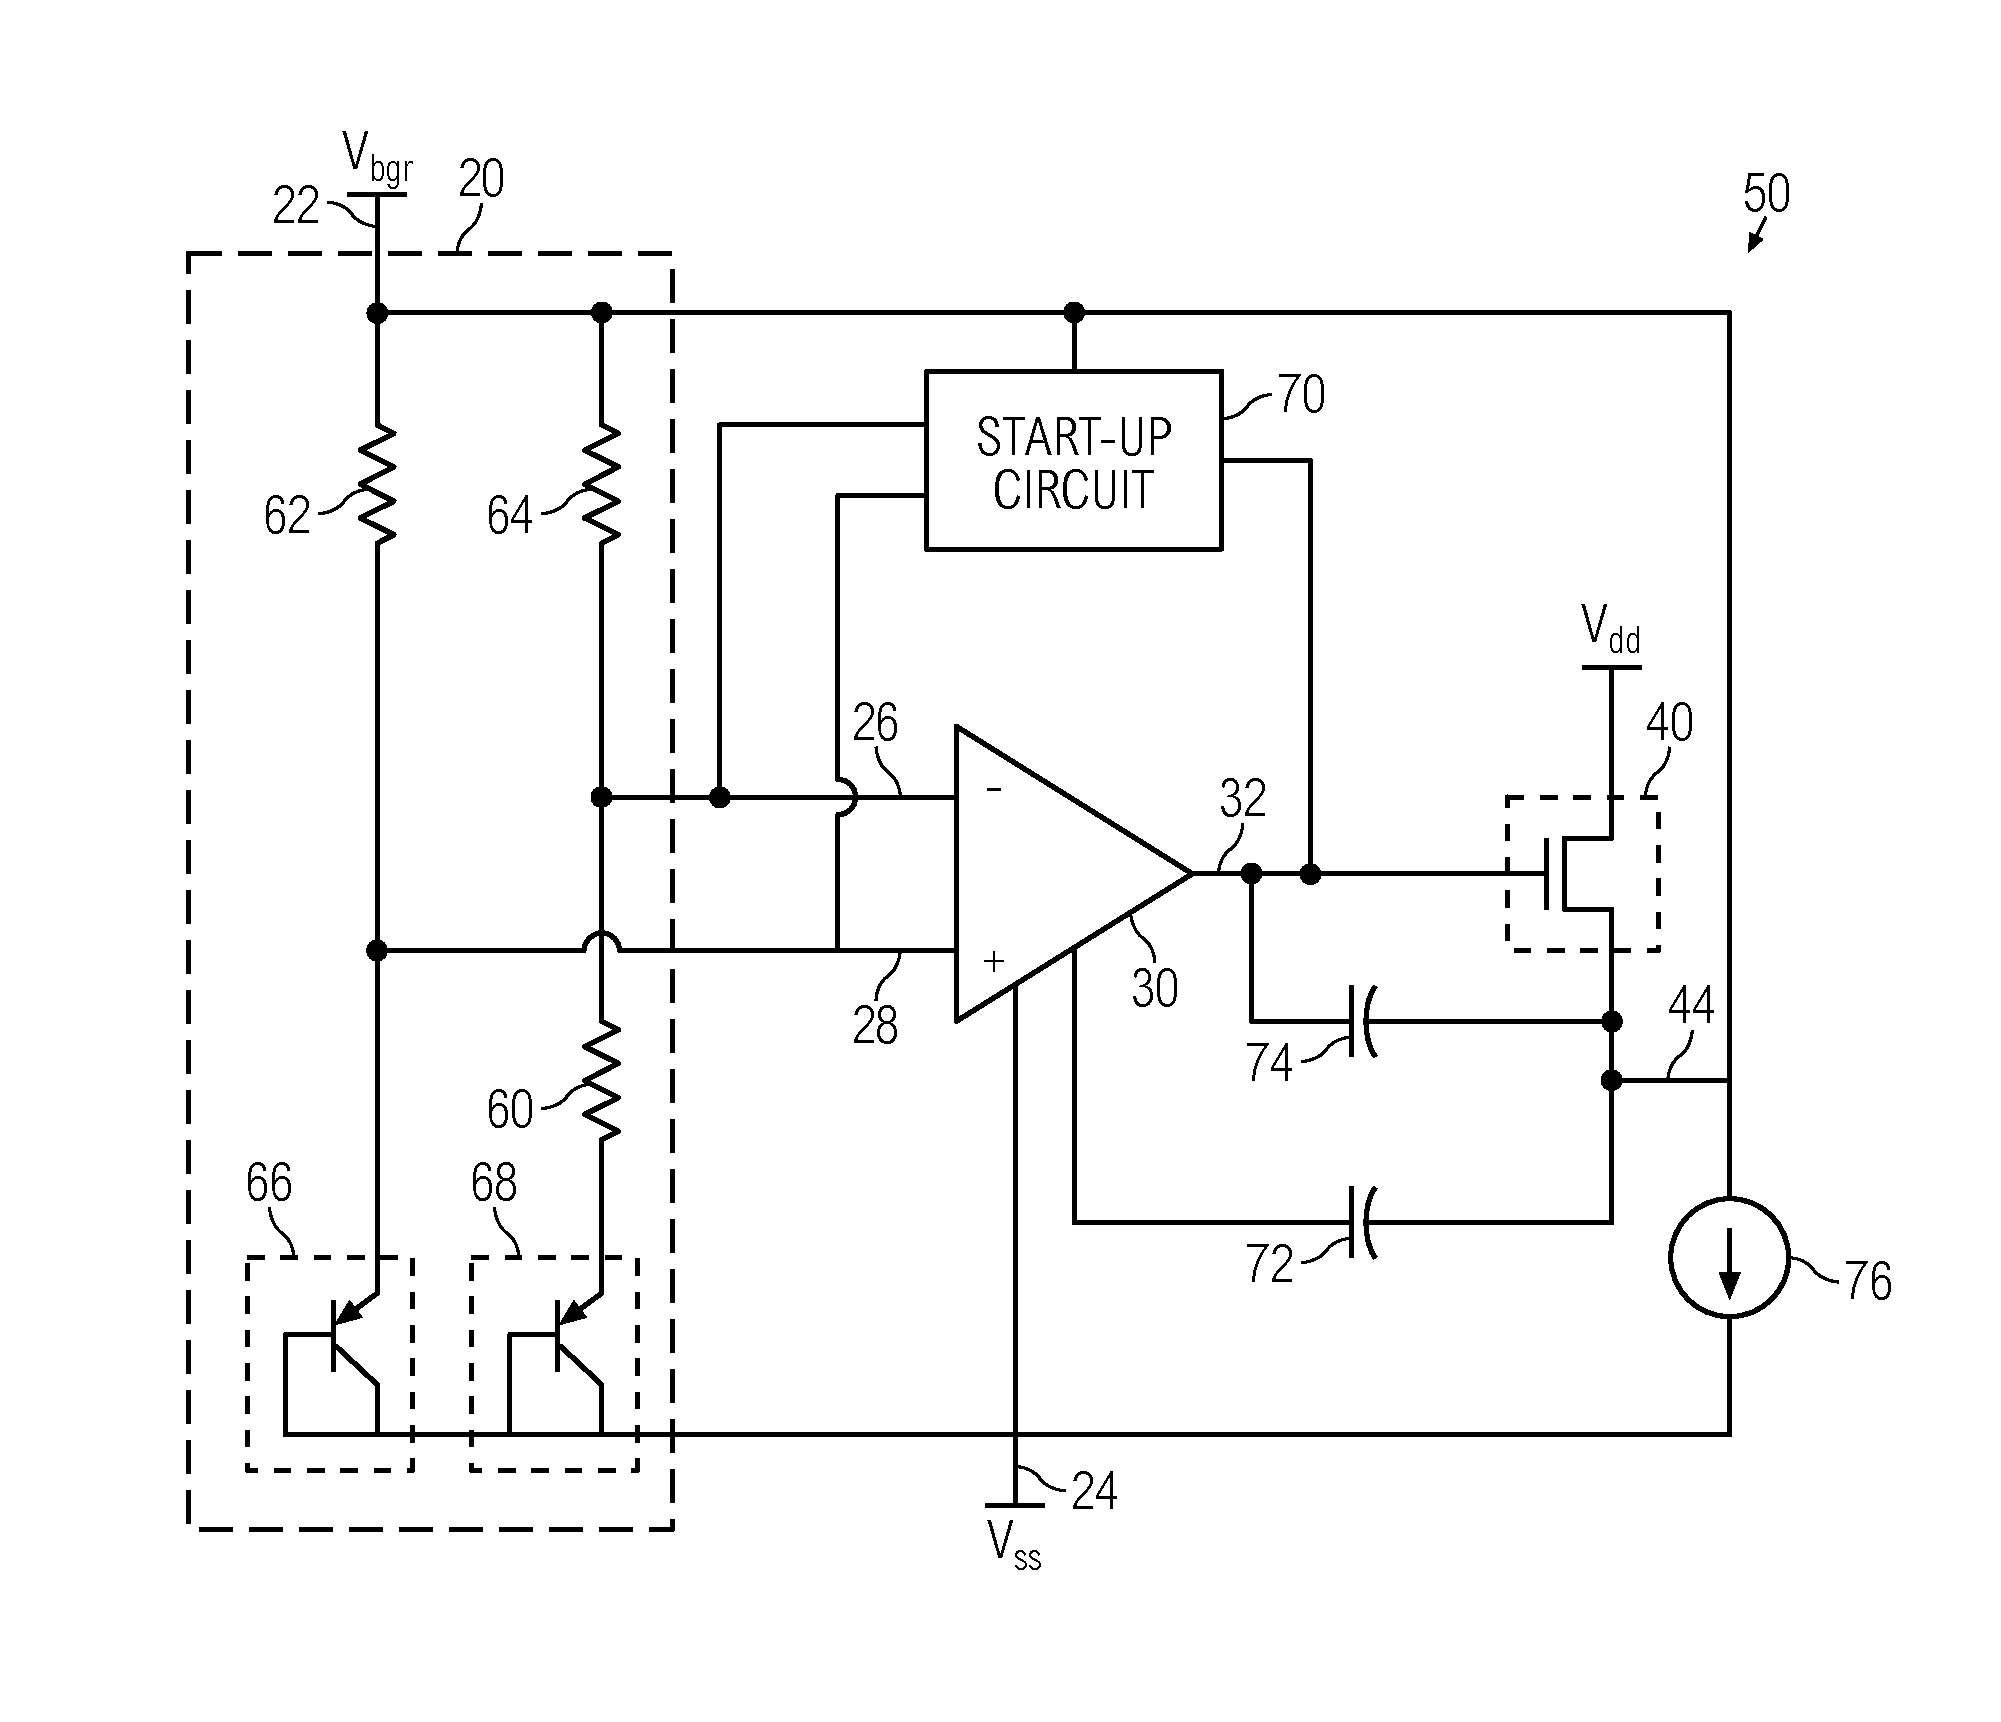 Bandgap reference circuit and regulator circuit with common amplifier